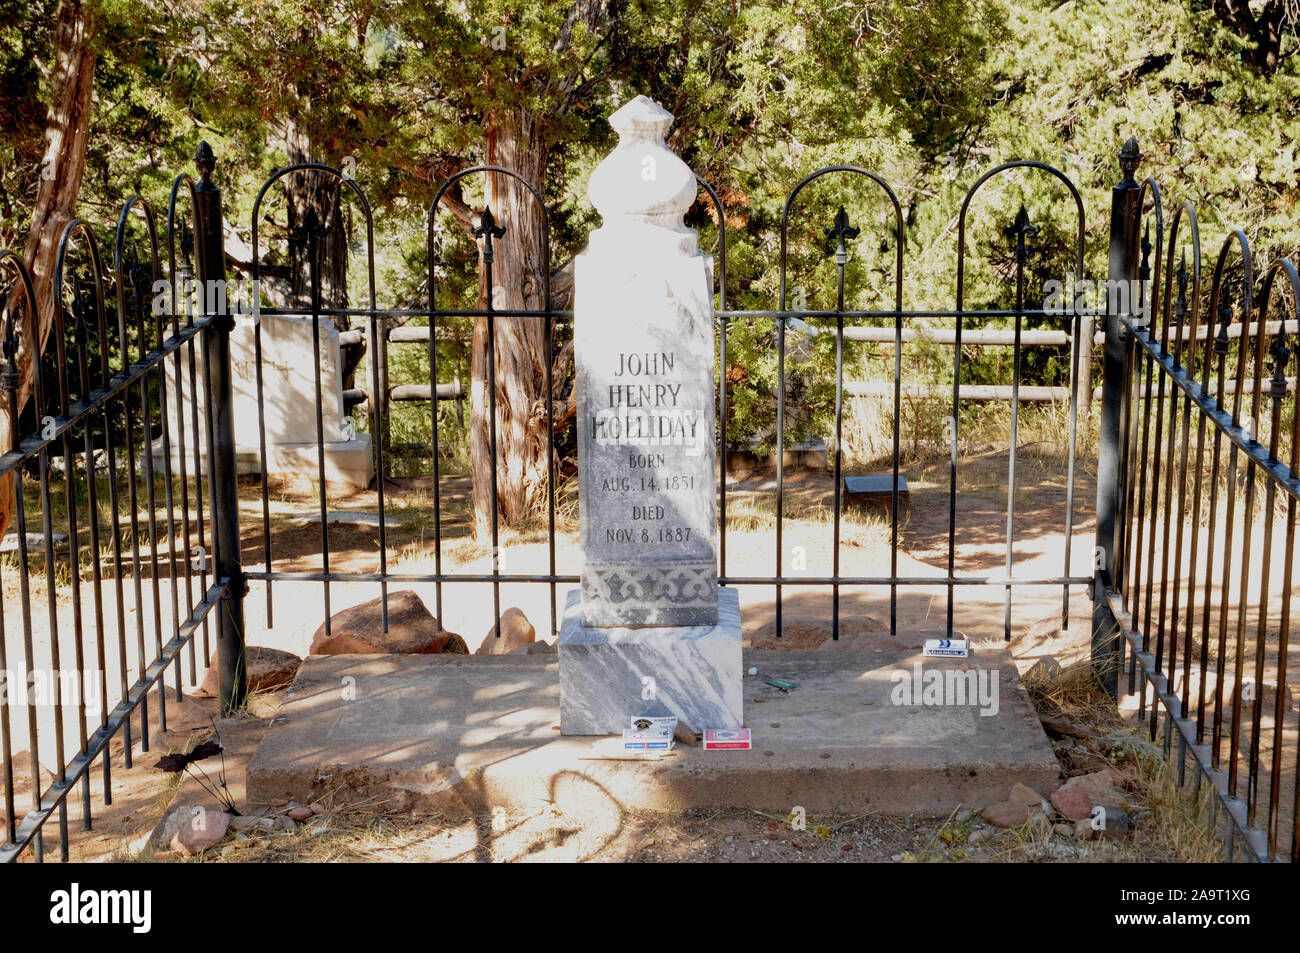 Memorial in the Potters Fied section of Linwood Cemetery, Glenwood Springs, Colorado. The monument is to Doc Holliday, Stock Photo